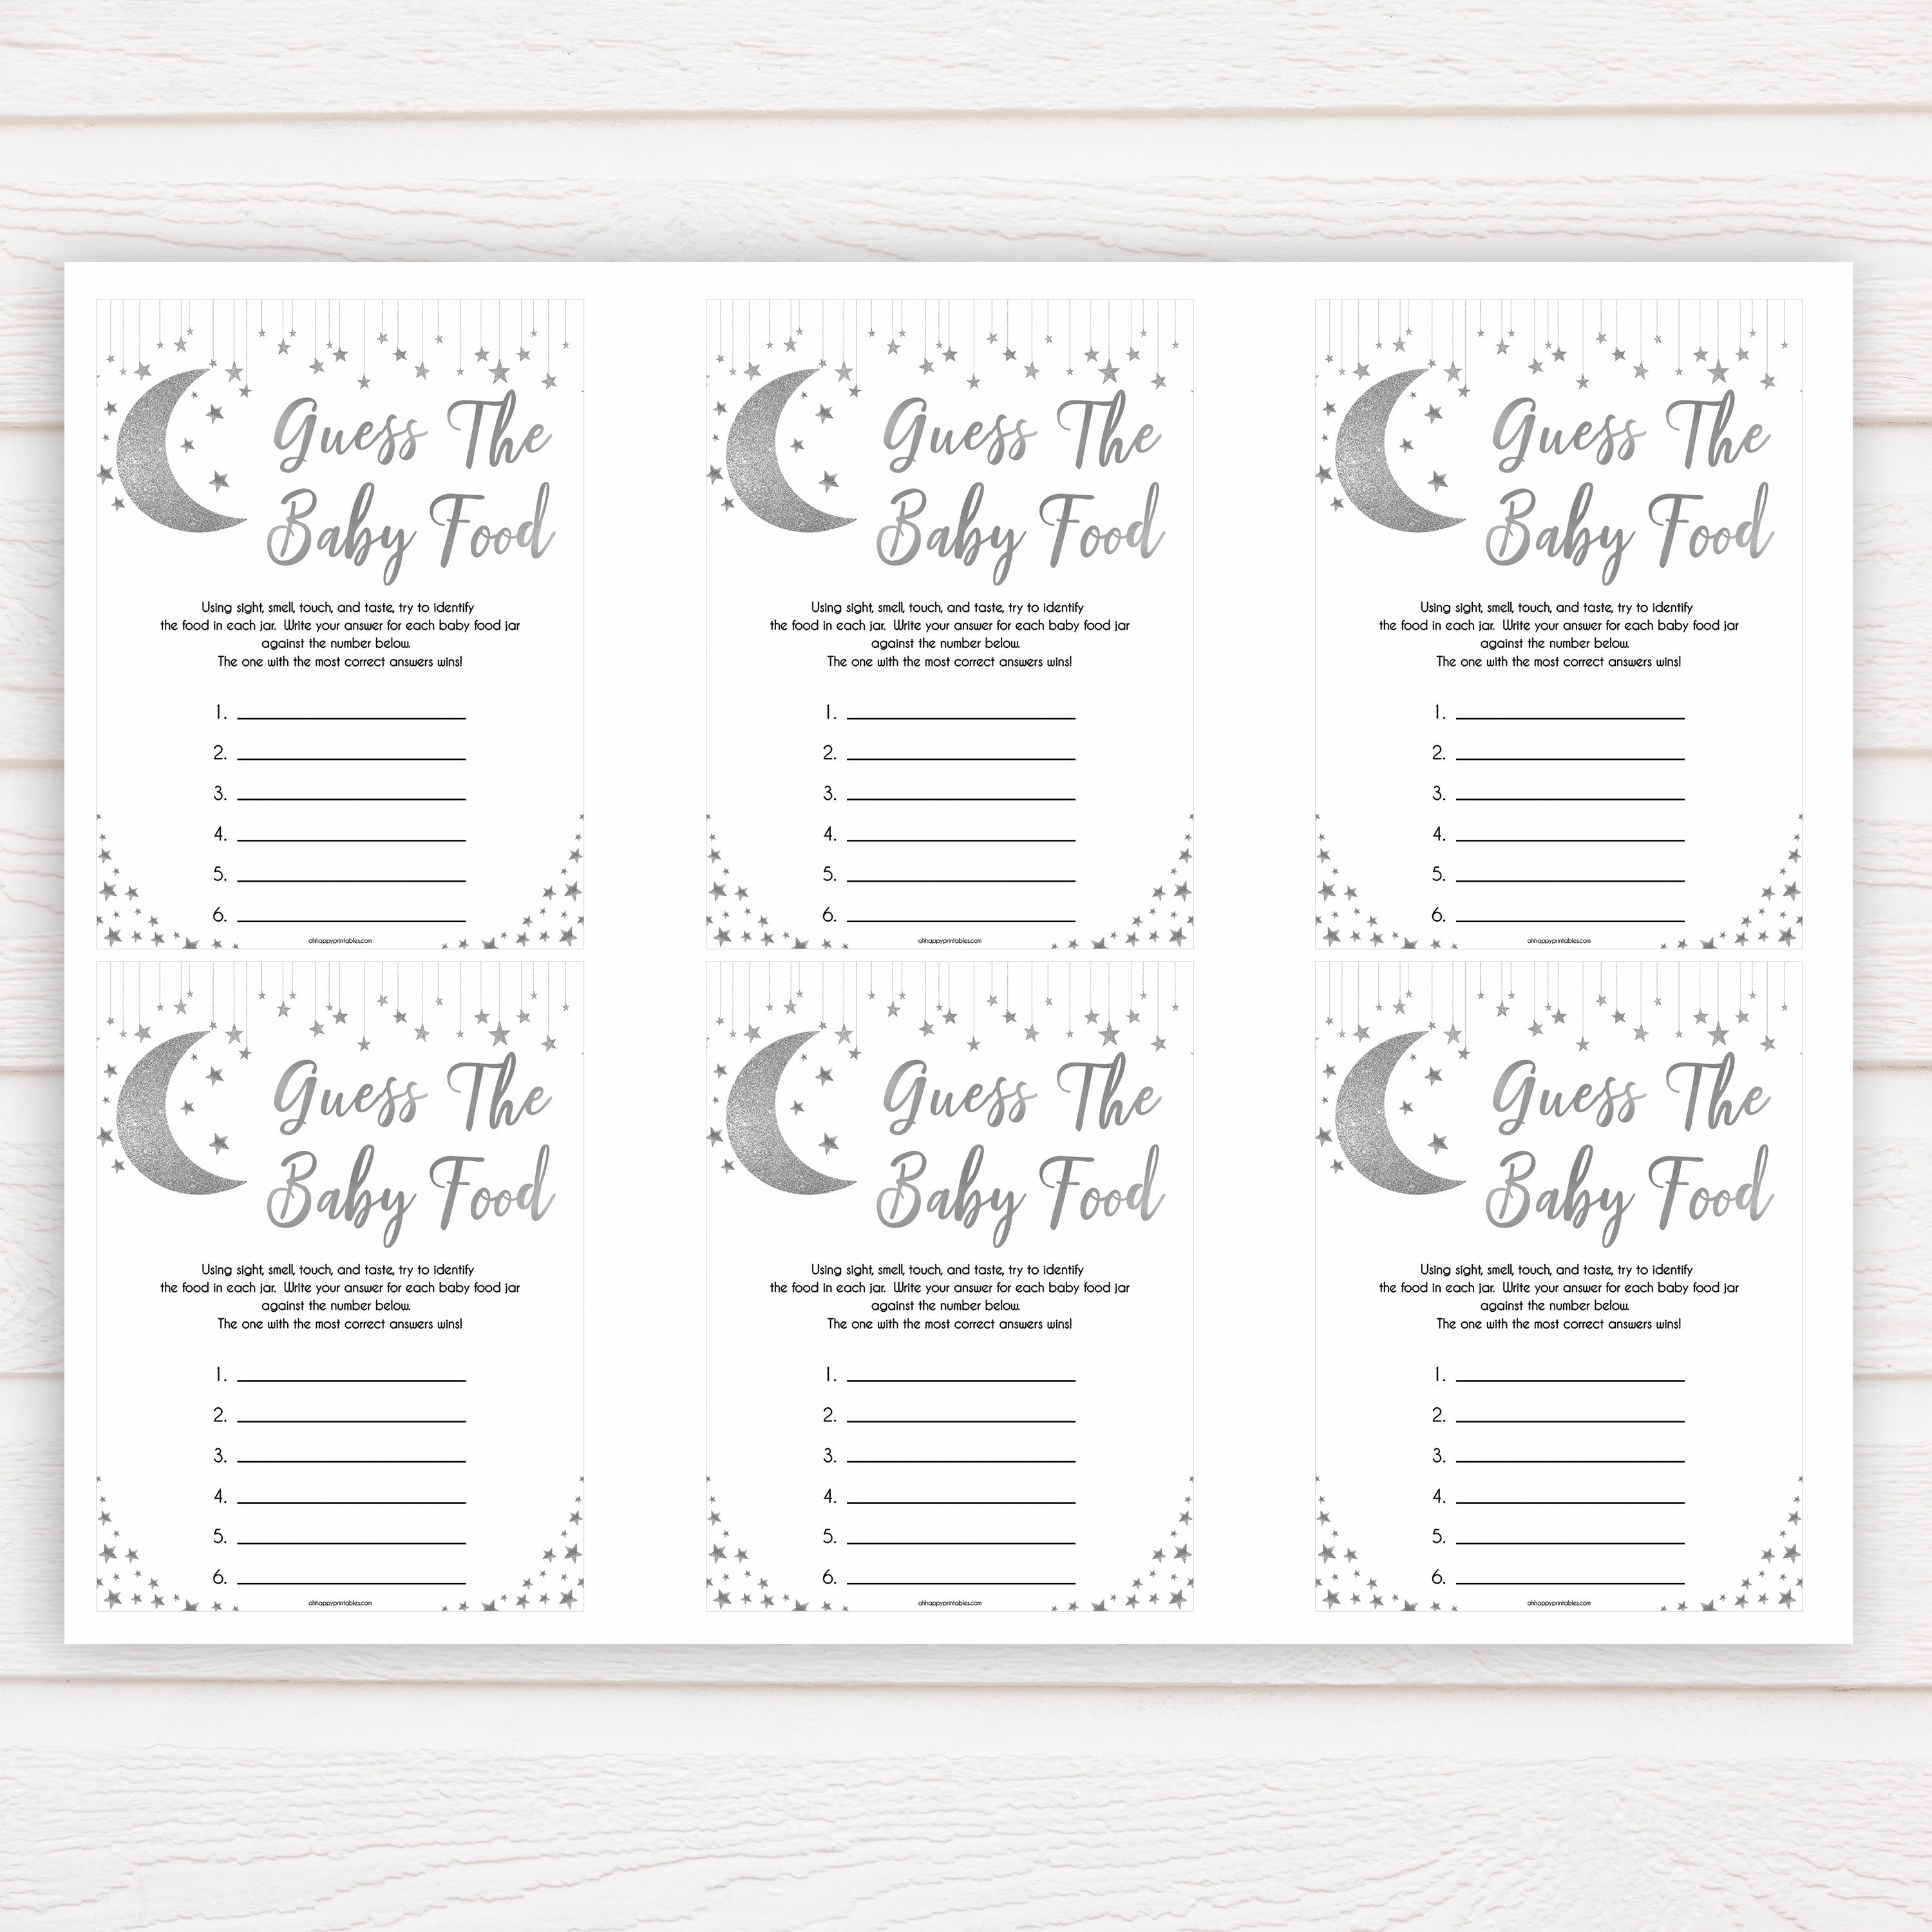 Silver little star, guess the baby food baby games, baby shower games, printable baby games, fun baby games, twinkle little star games, baby games, fun baby shower ideas, baby shower ideas